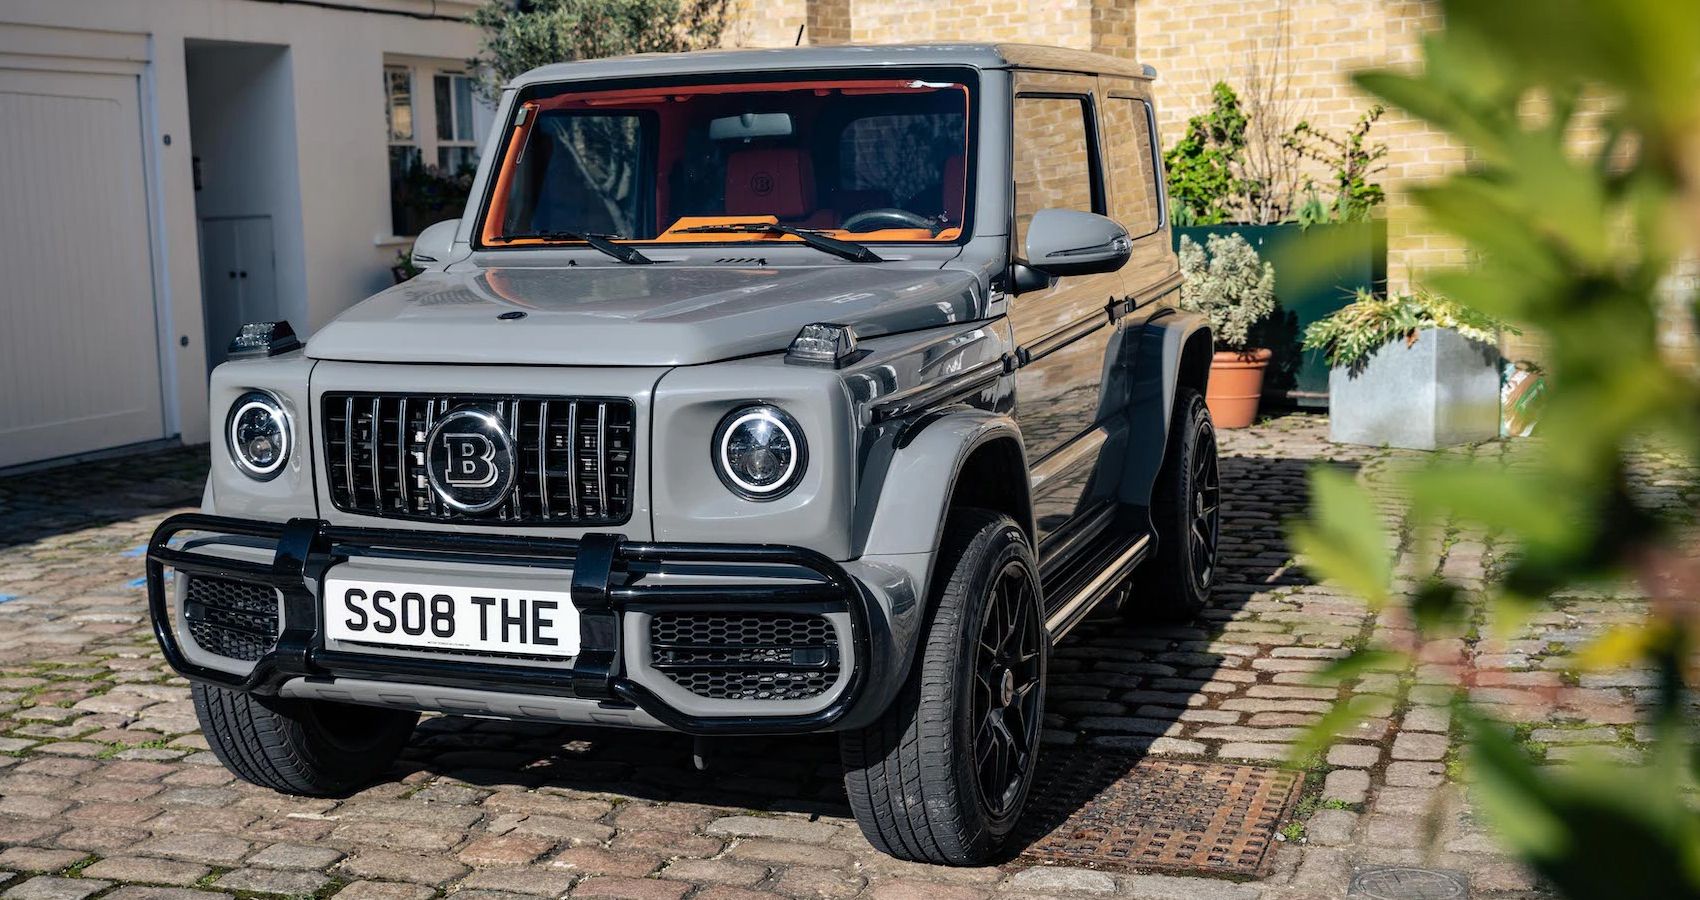 New Suzuki Jimny is a blocky cute-ute with shades of G-Class - CNET